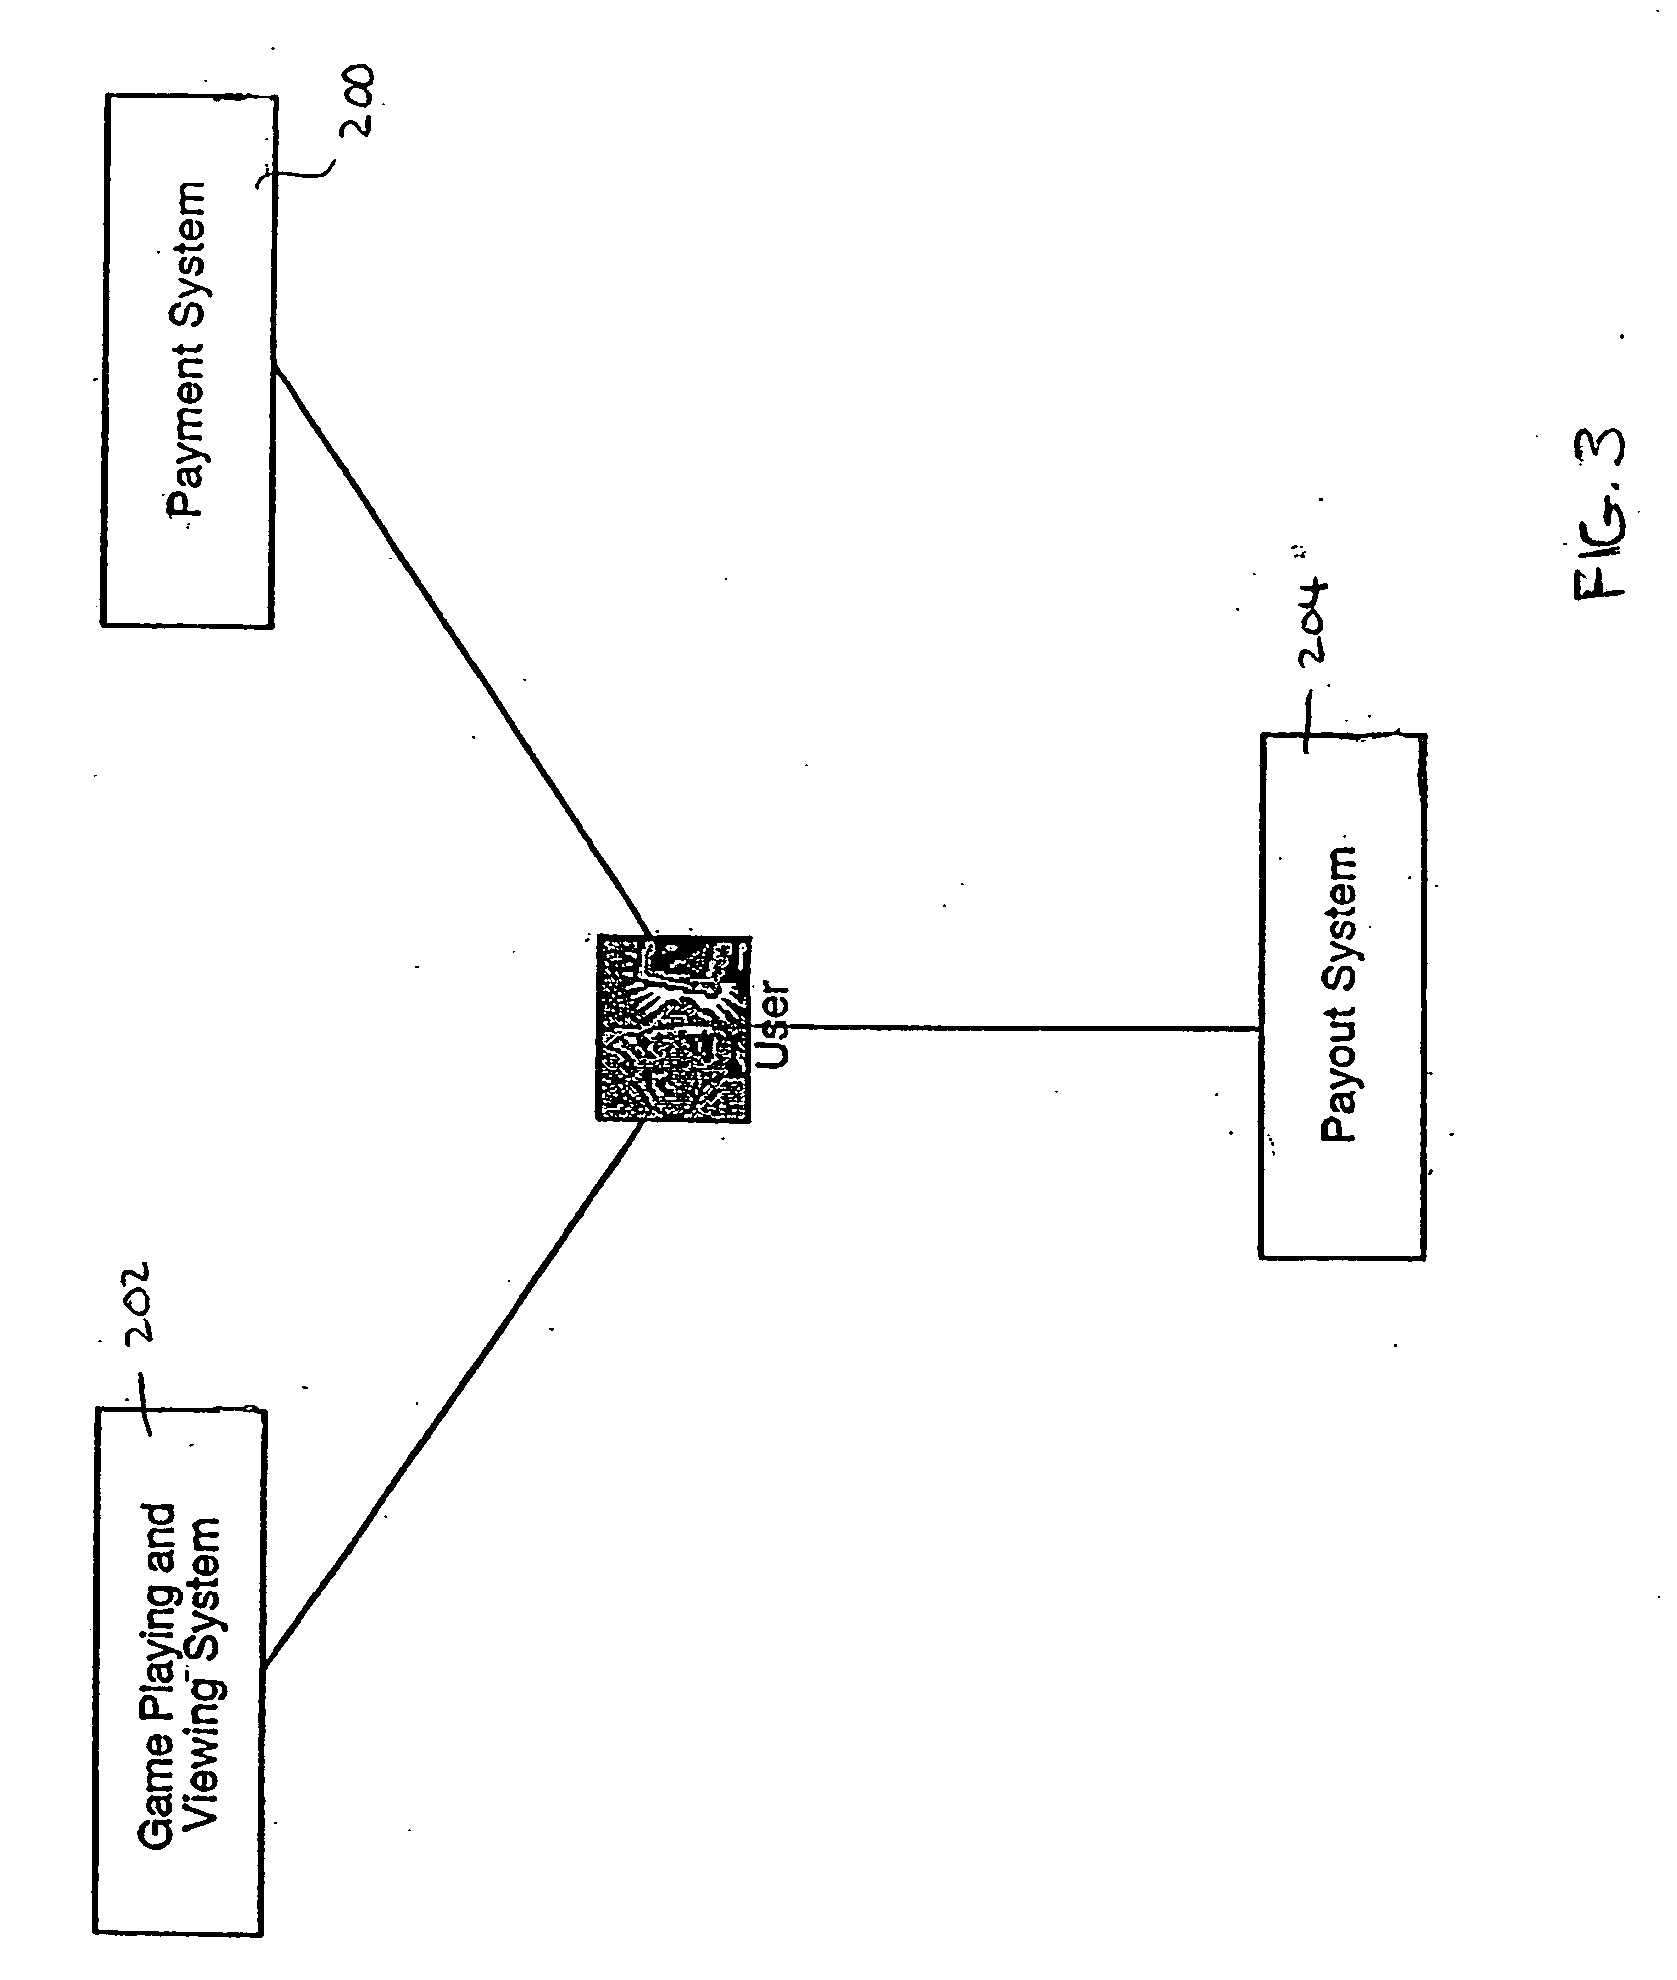 Method and apparatus for playing games